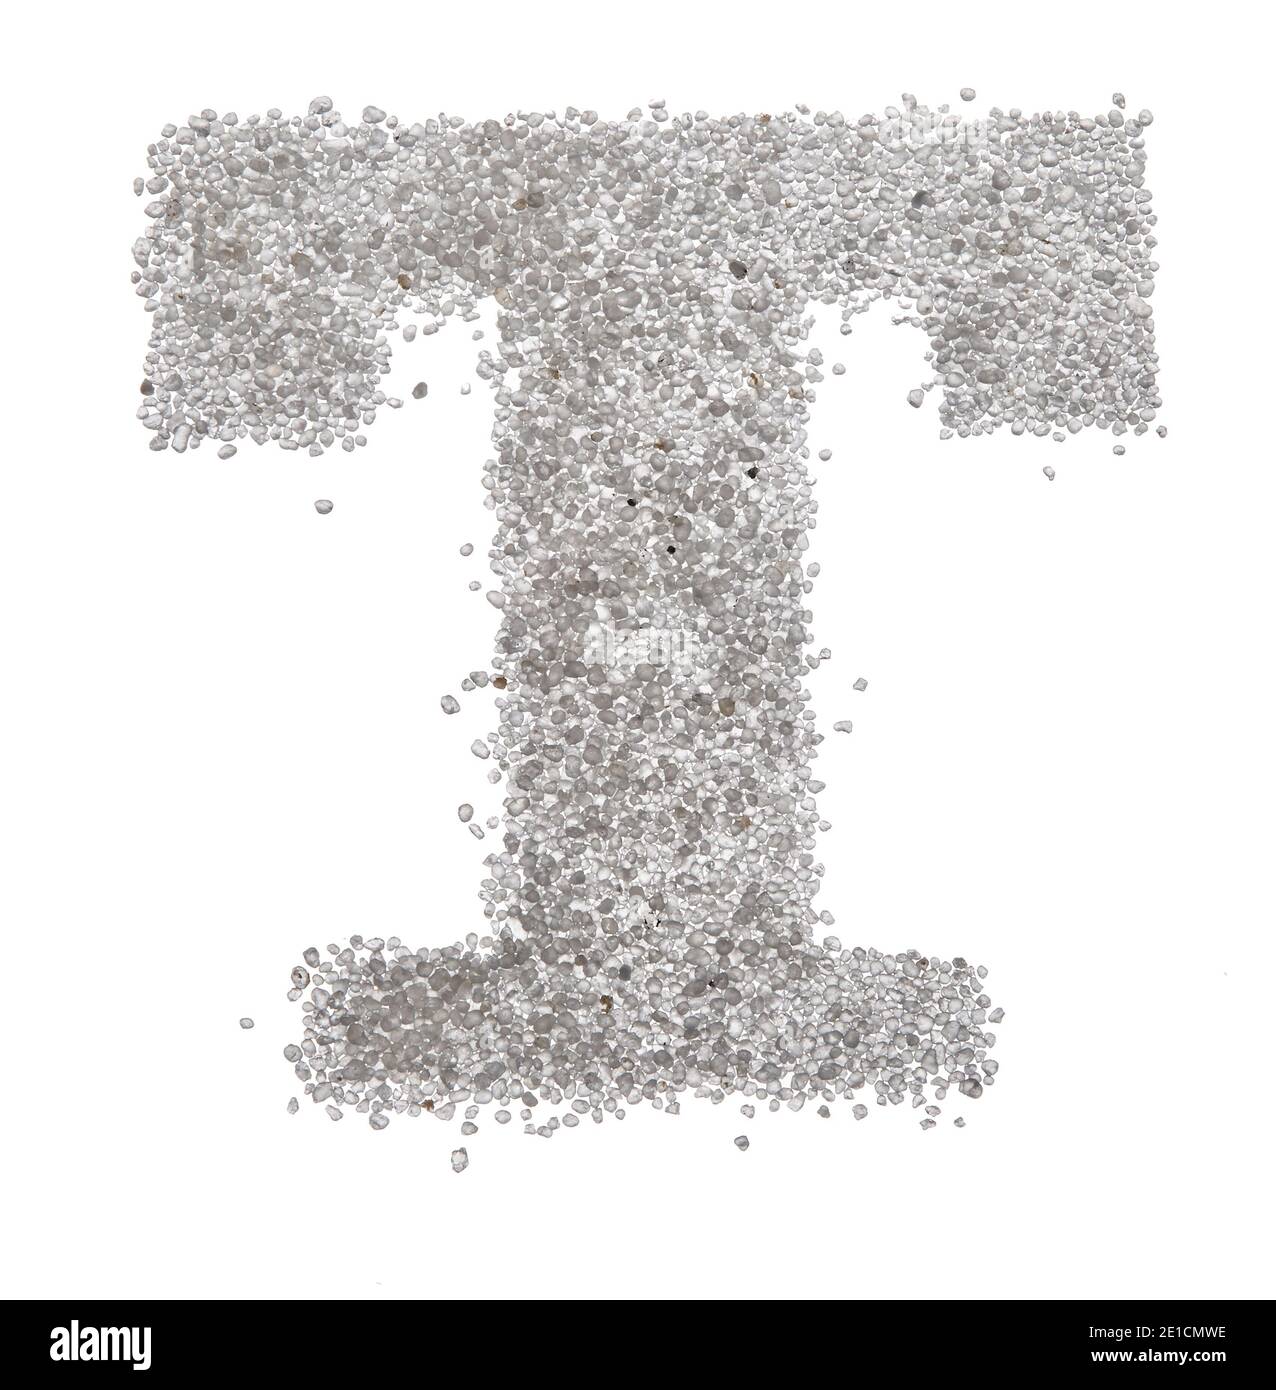 Serif sand letter capital T photographed on a white background Stock Photo